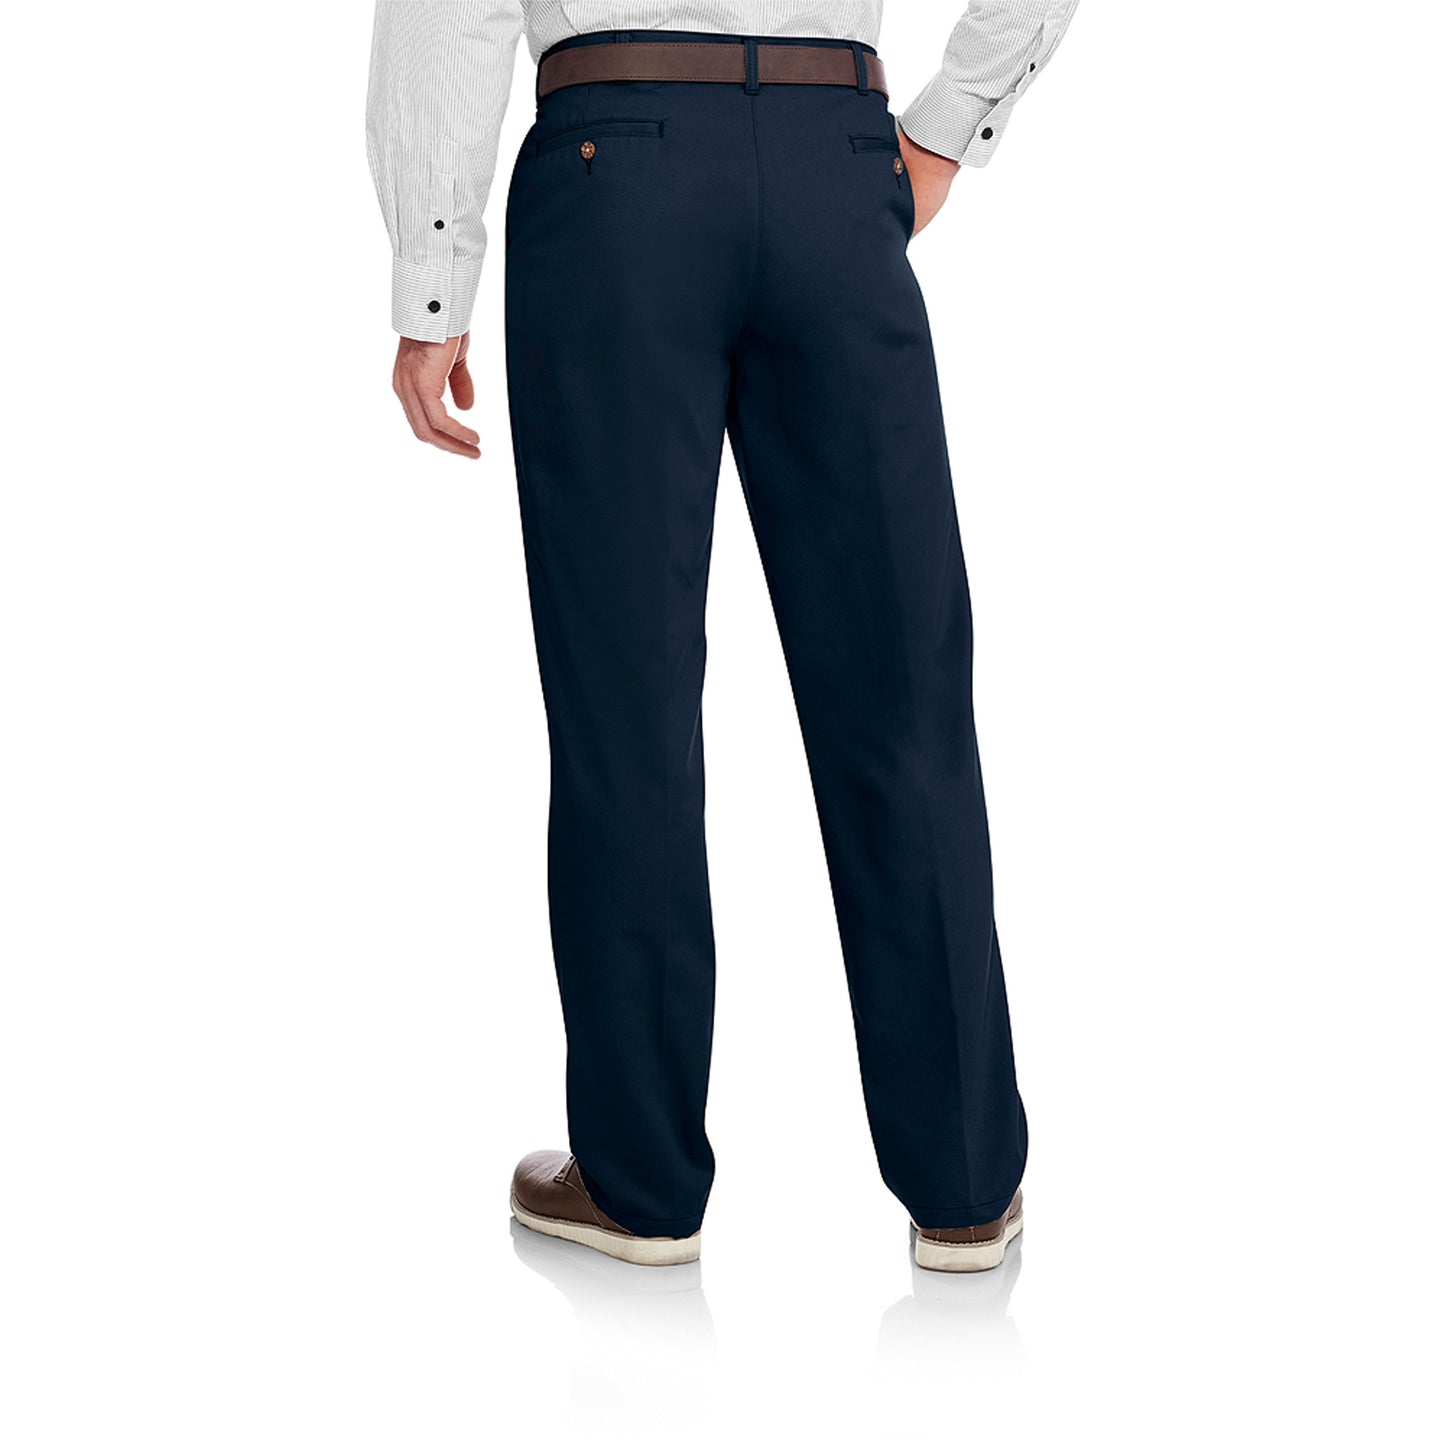 George Mens and Big Mens Wrinkle Resistant Flat Front 100% Cotton Twill Pant with Soil Release